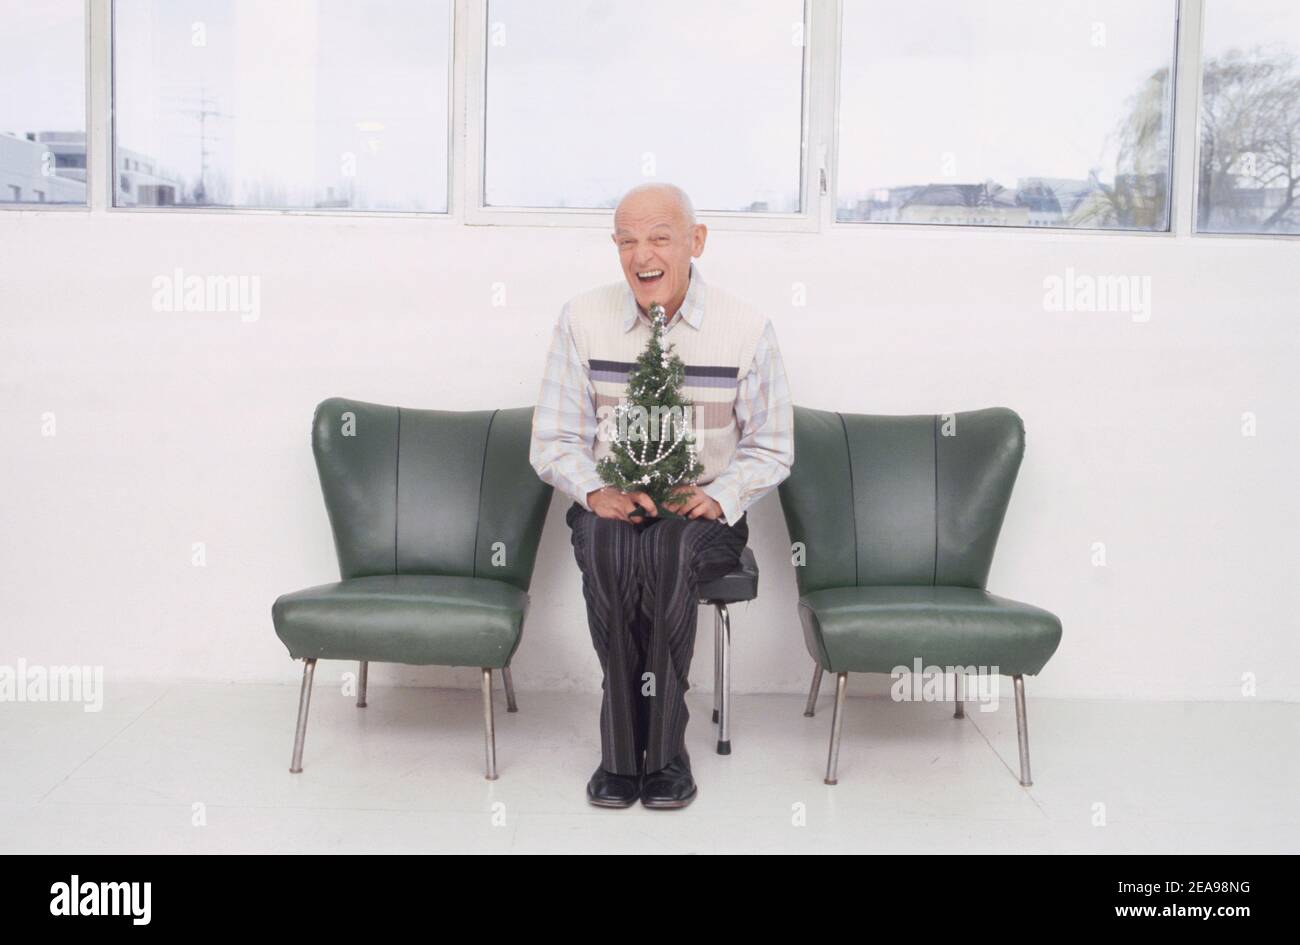 old man sits with mini Christmas tree on chair between two armchairs Stock Photo